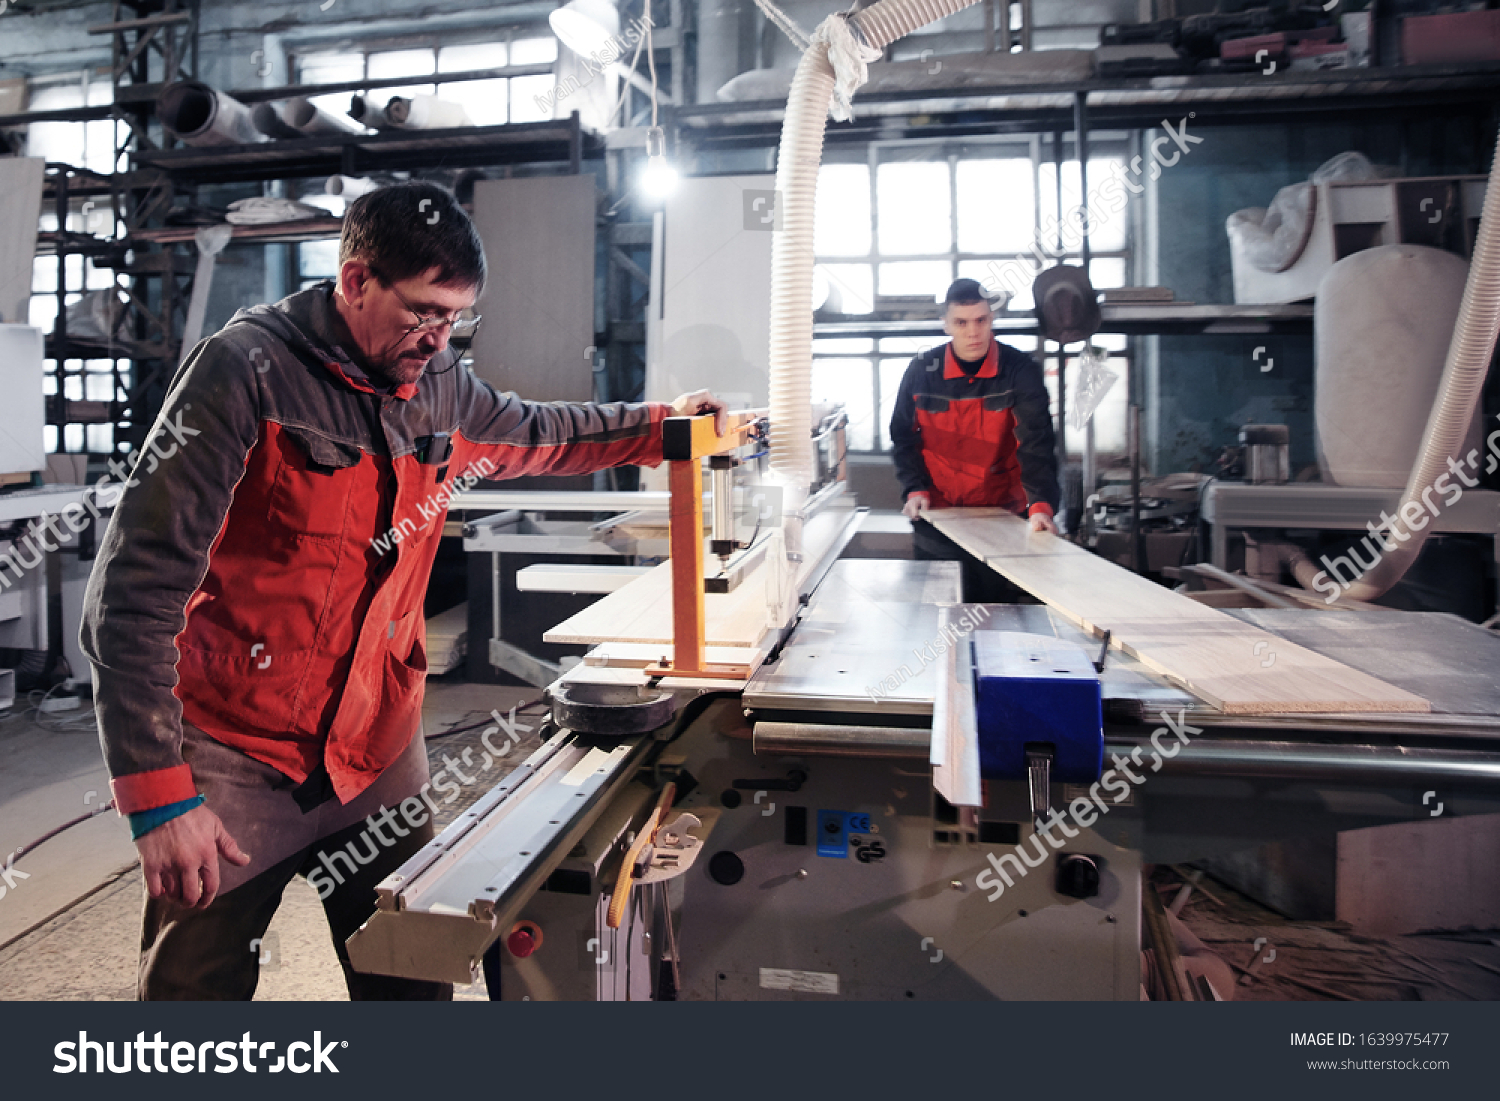 Process of production and manufacture of wooden furniture in furniture factory. Worker carpenter man in overalls processes wood on special equipment #1639975477